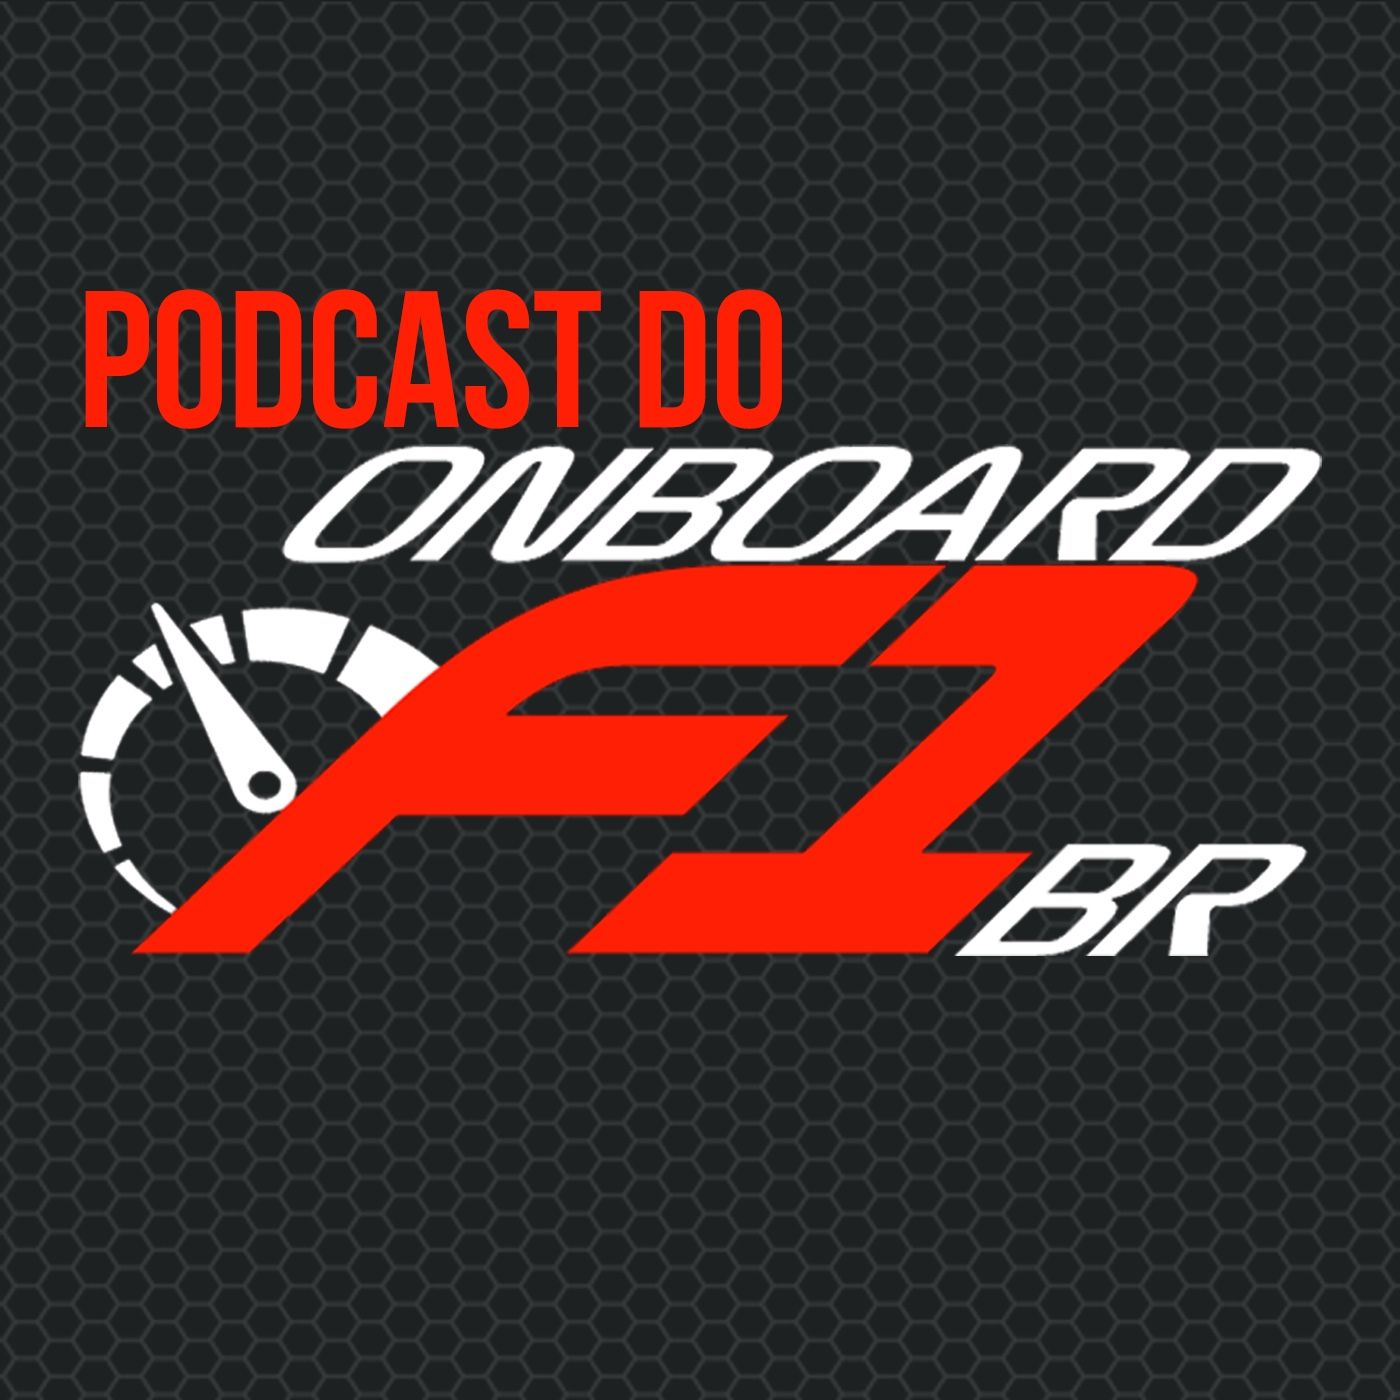 Podcast Do Onboardf1br